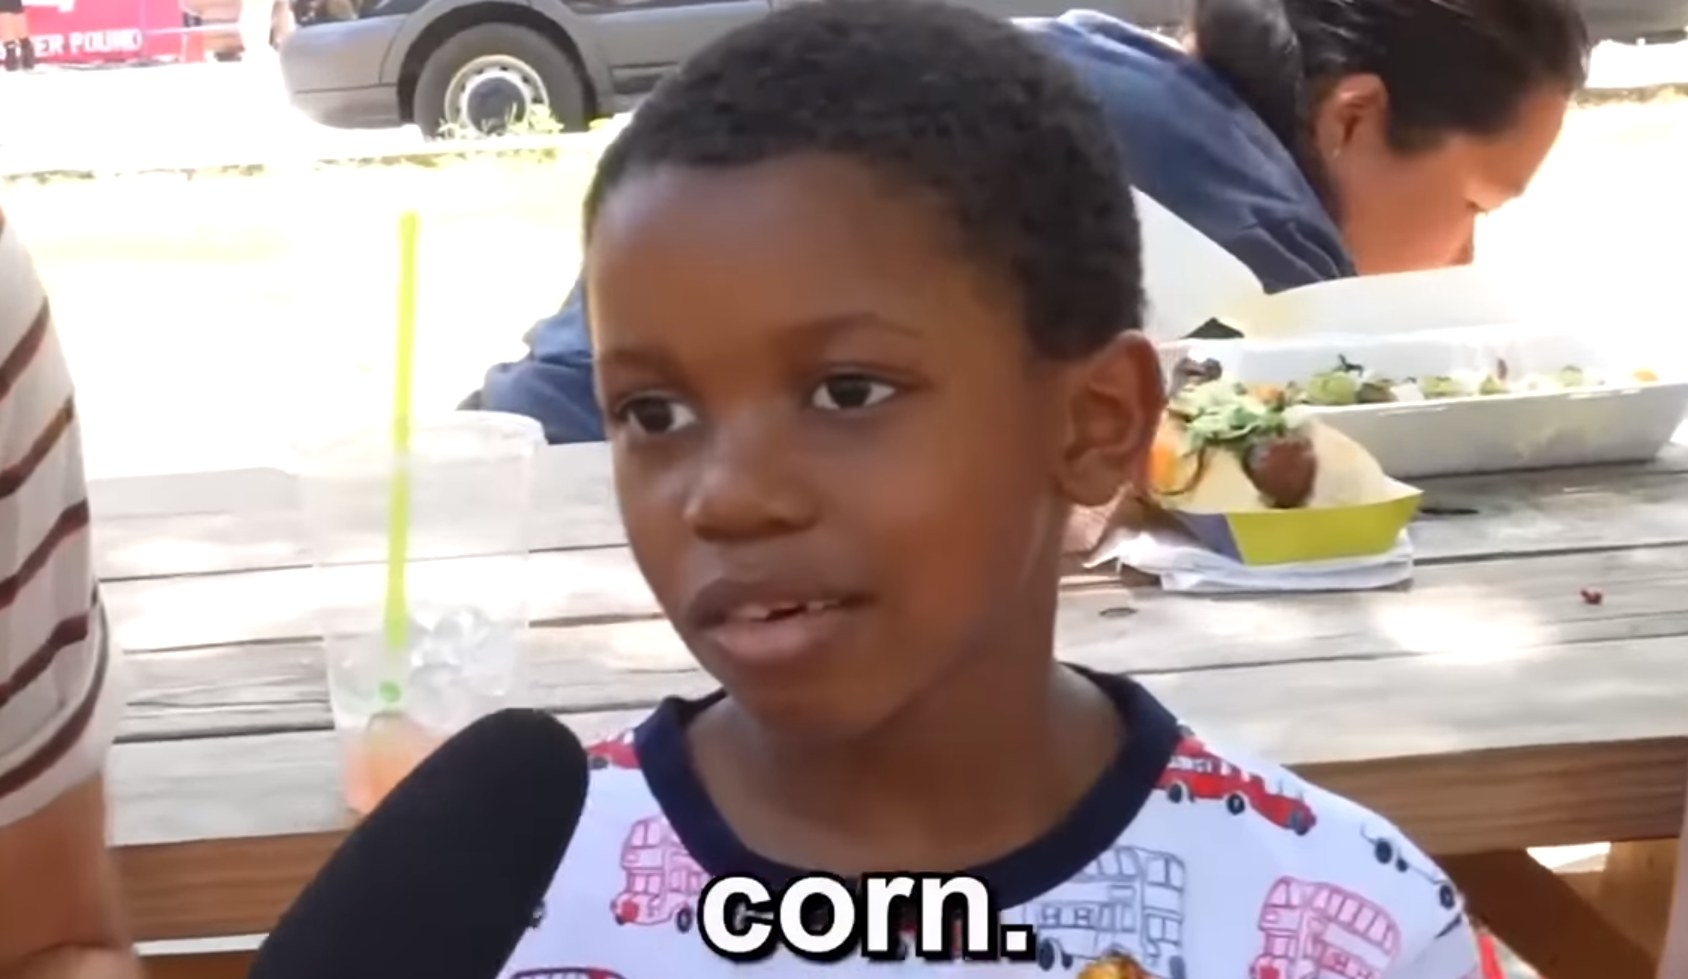 A young kid explaining his love of corn